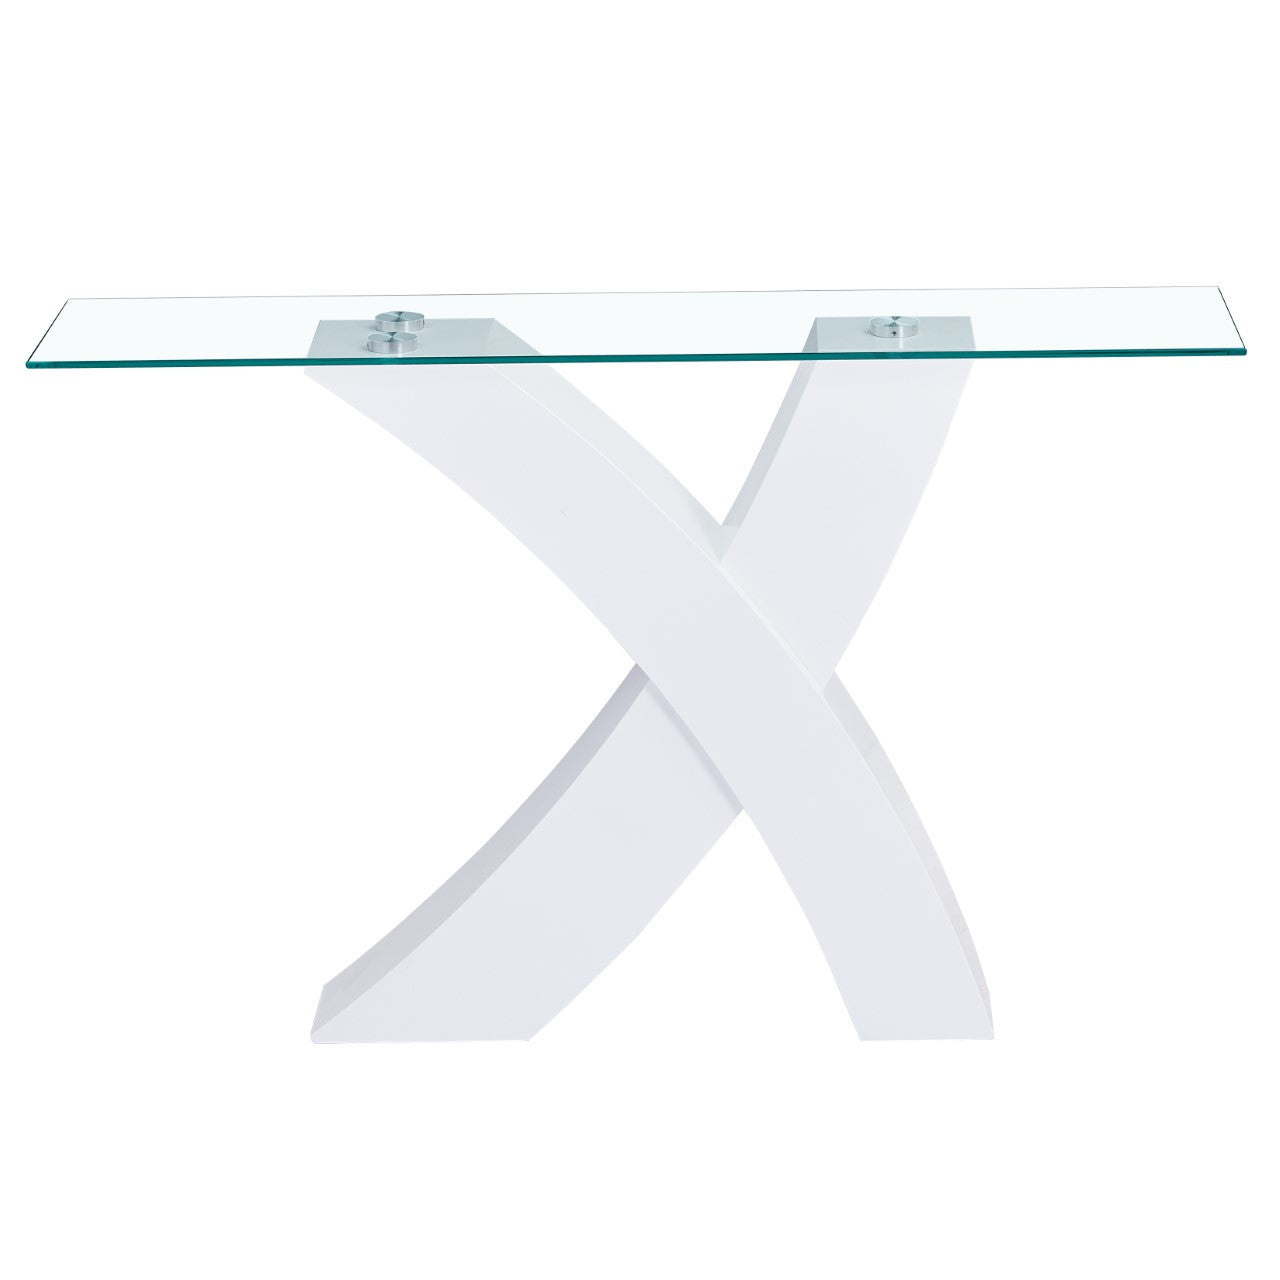 CO-KL04 Console Table